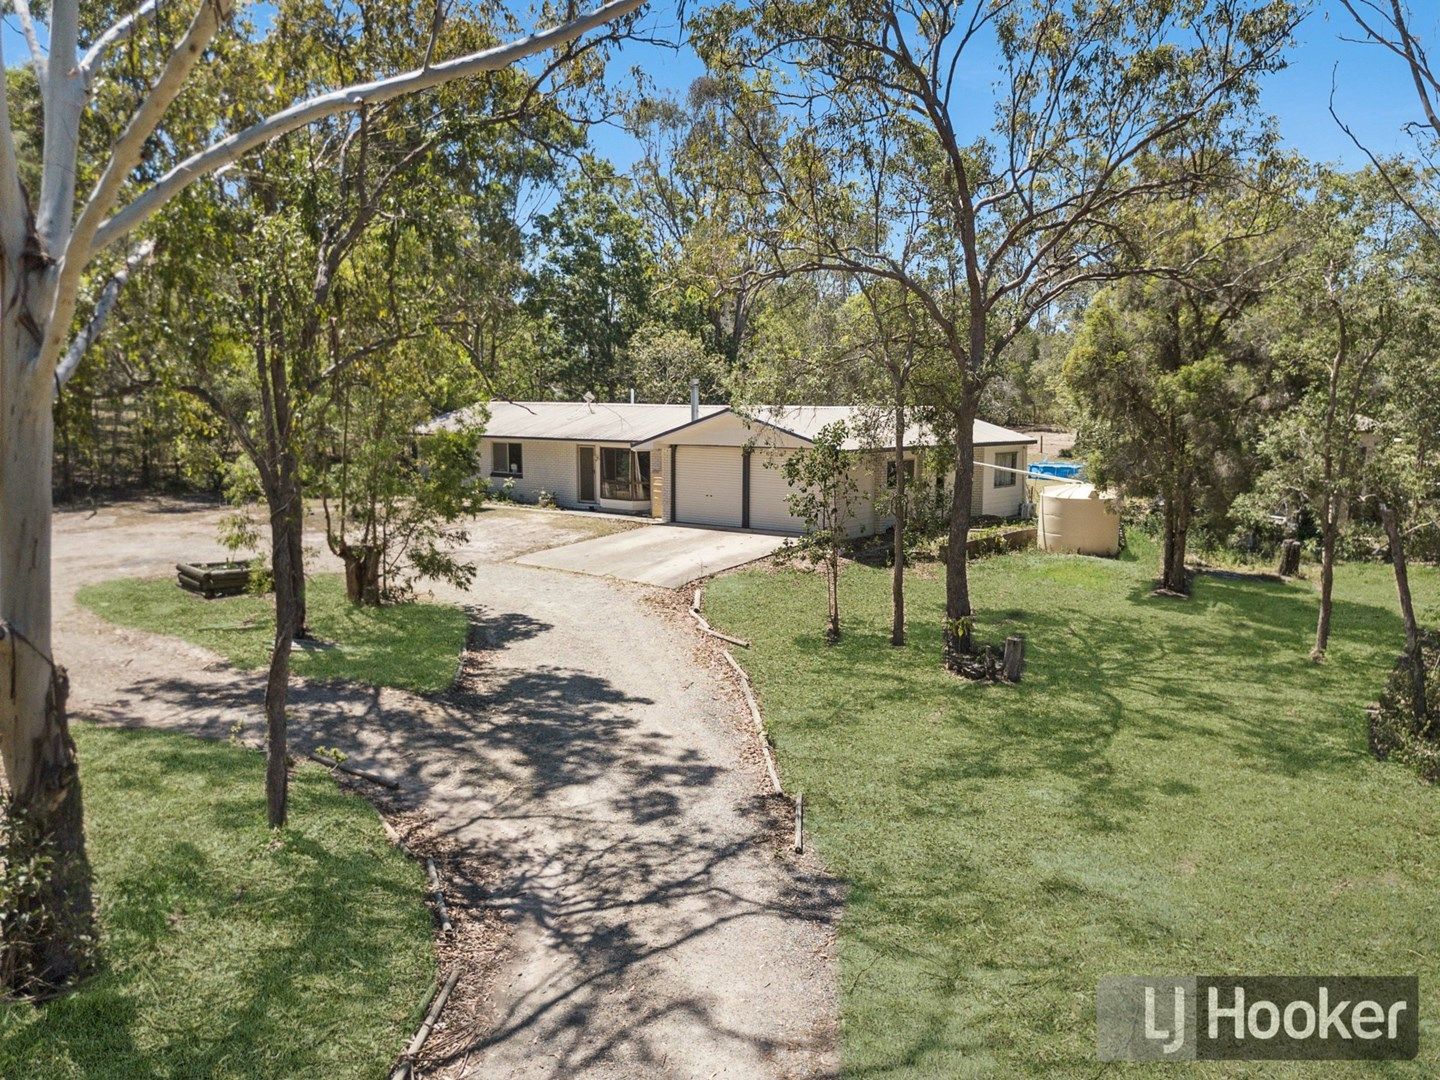 35-41 Weaber Road, Buccan QLD 4207, Image 0